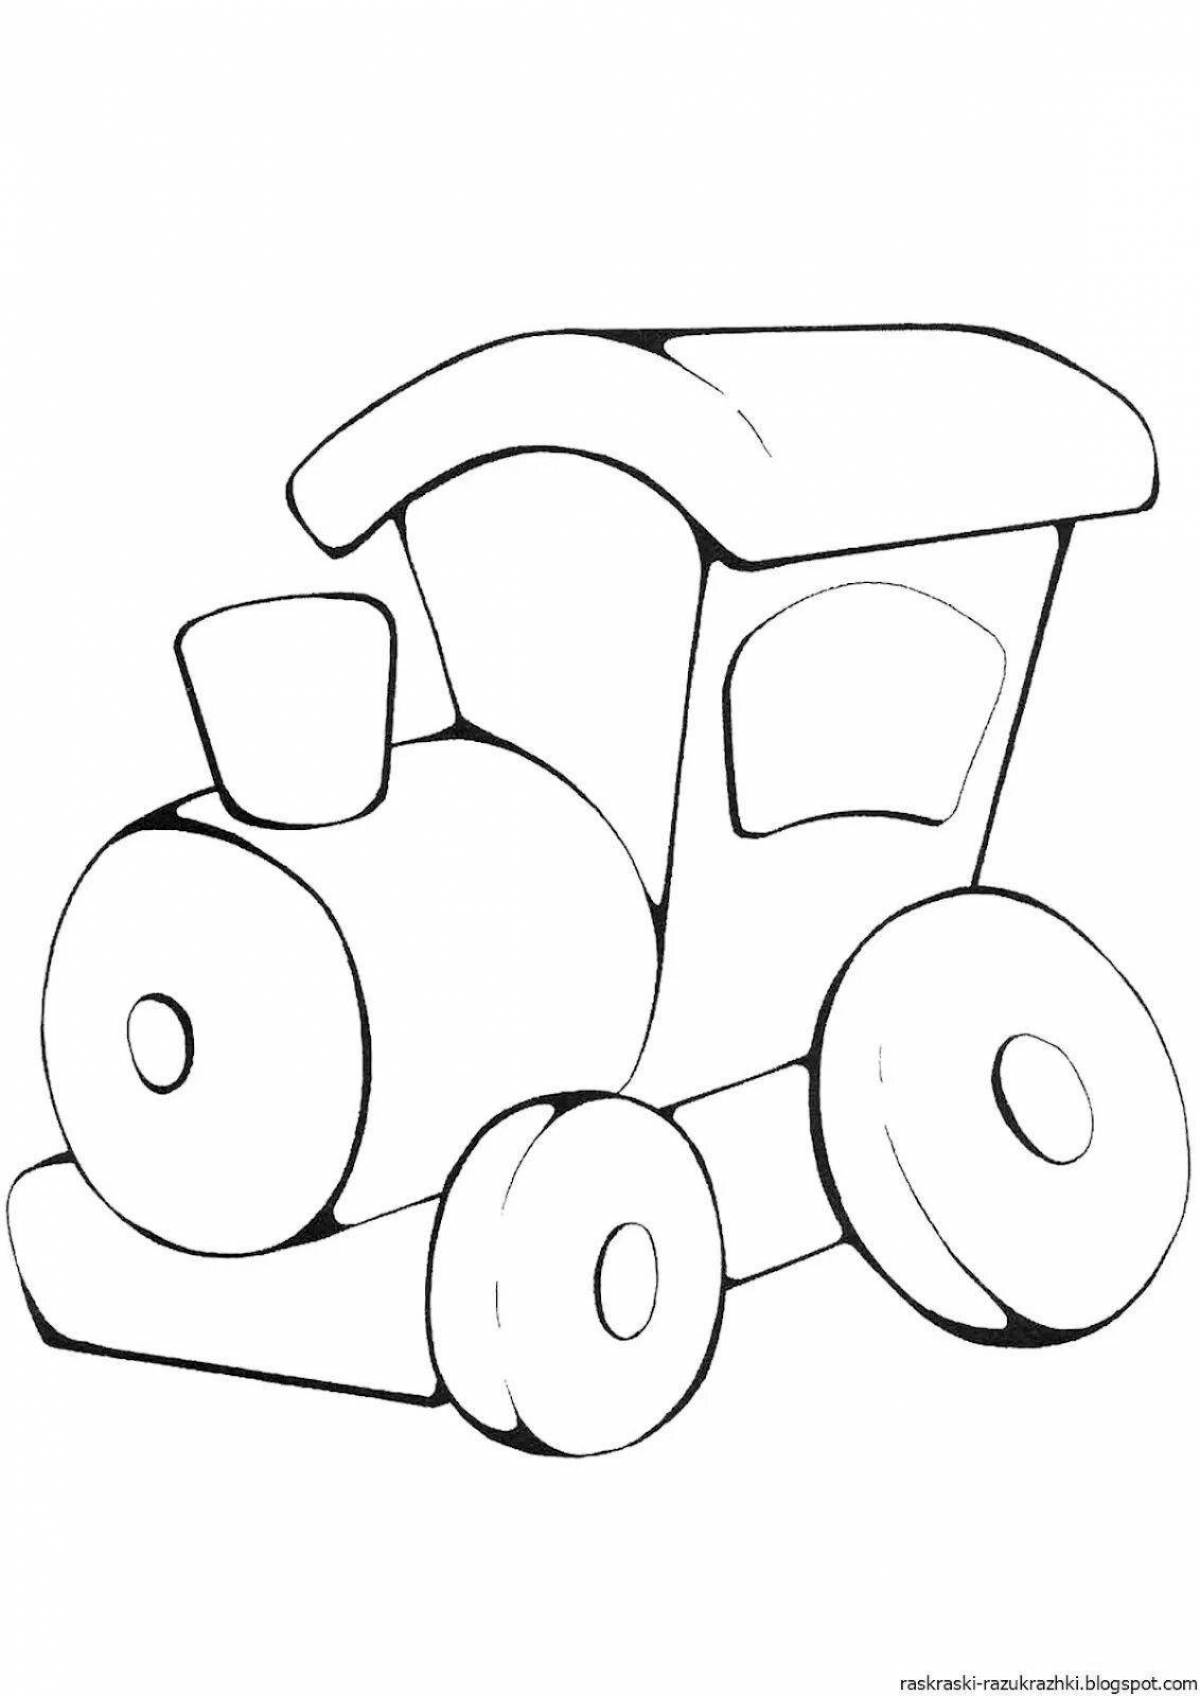 Coloring page cute train for kids